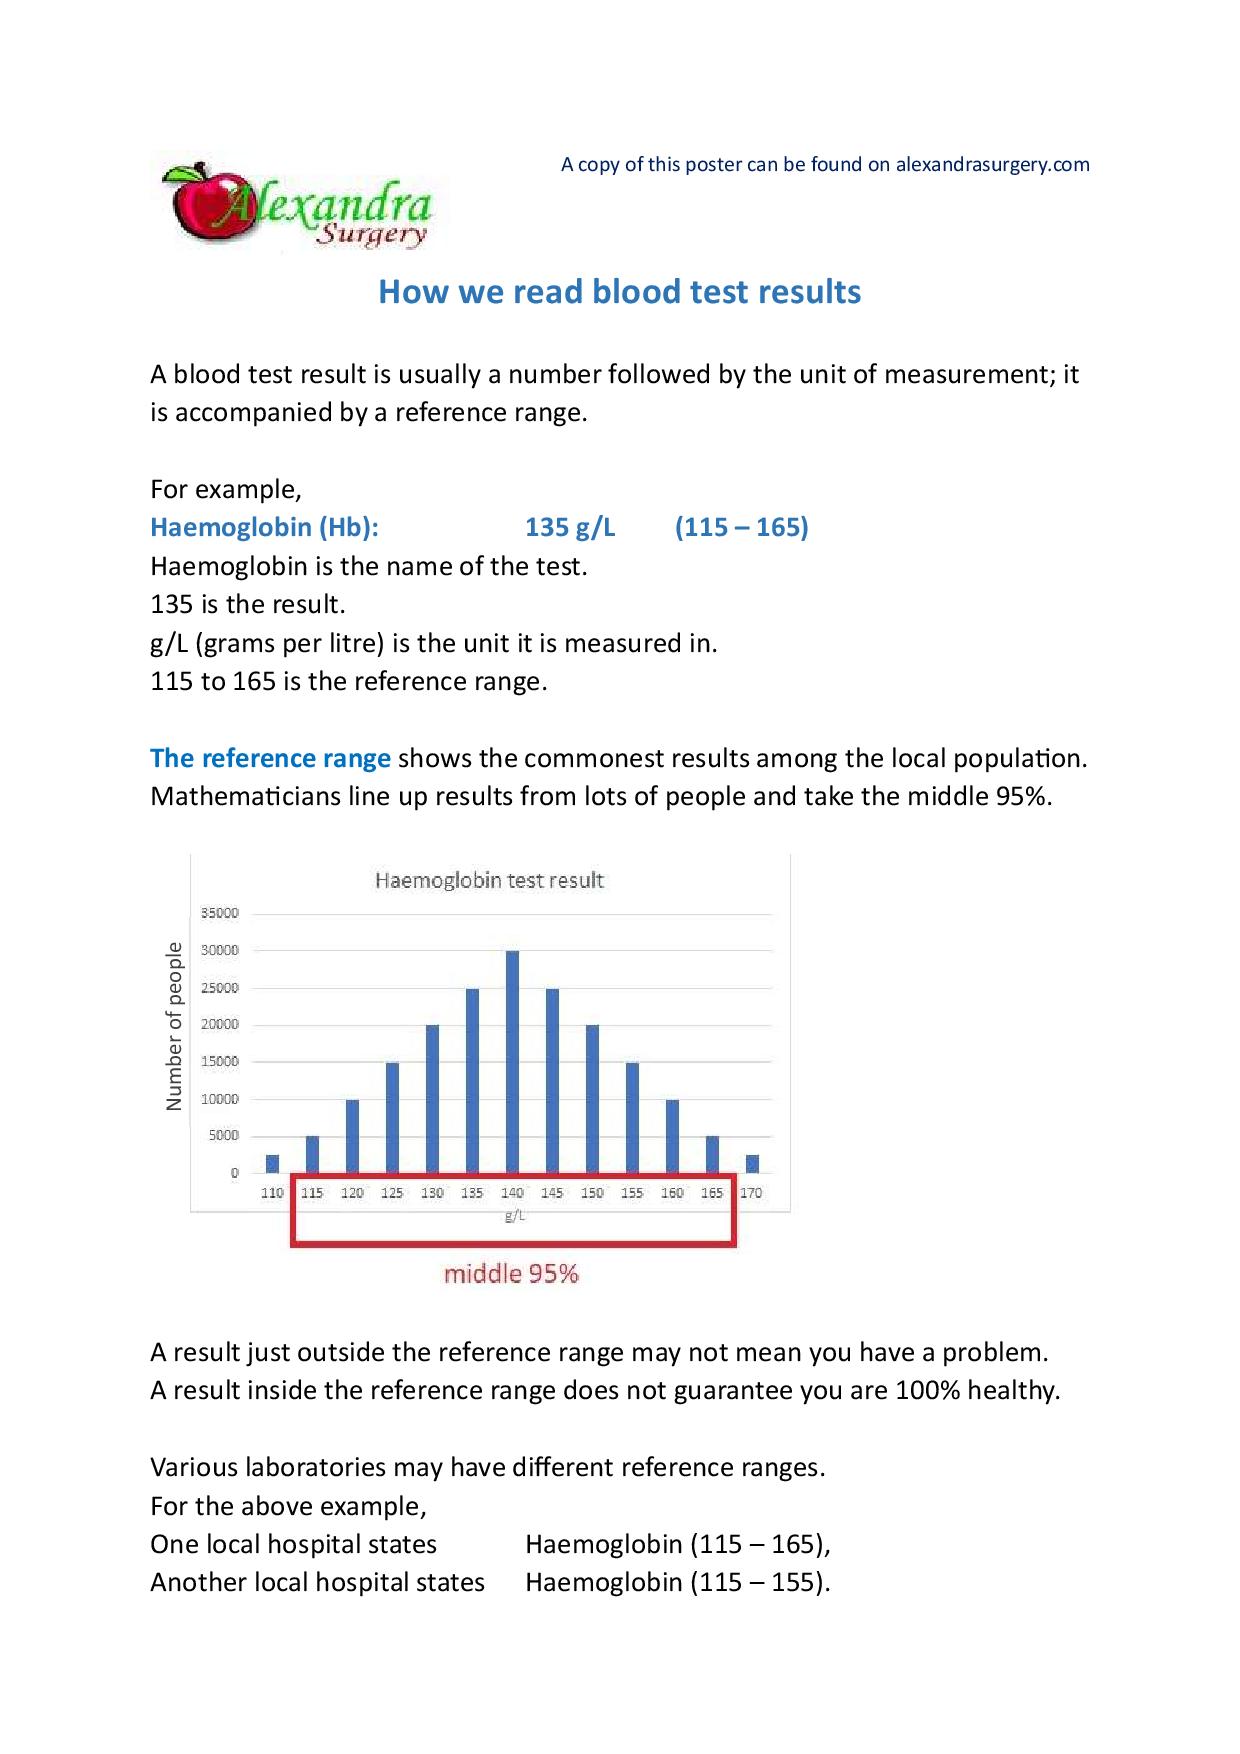 How we read blood test results